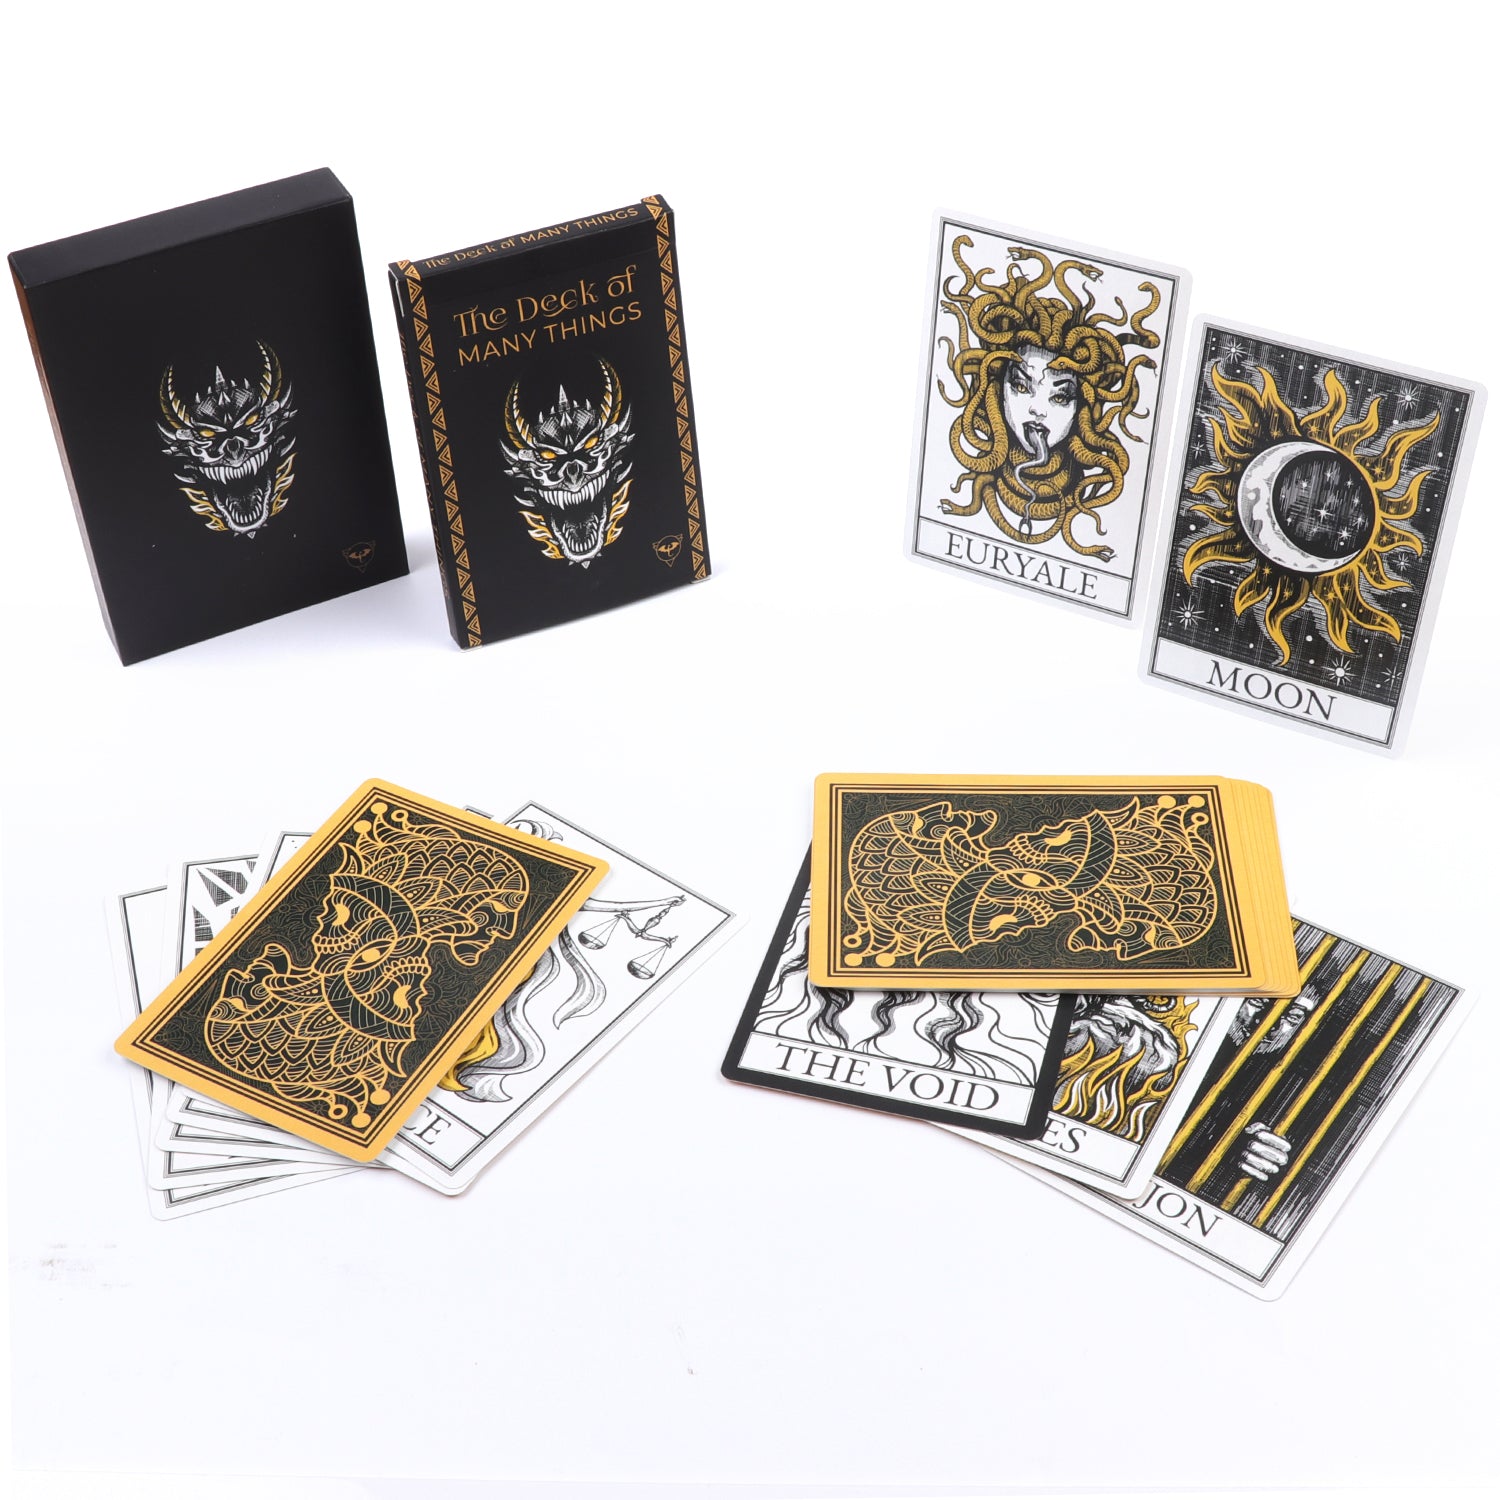 The Deck of Many Things & The Deck of Many Fates - 49 Hand-Illustrated  Colorful Fantasy Tabletop Role Playing Game RPG Storytelling Tarot Card  Dungeon Master Accessories 